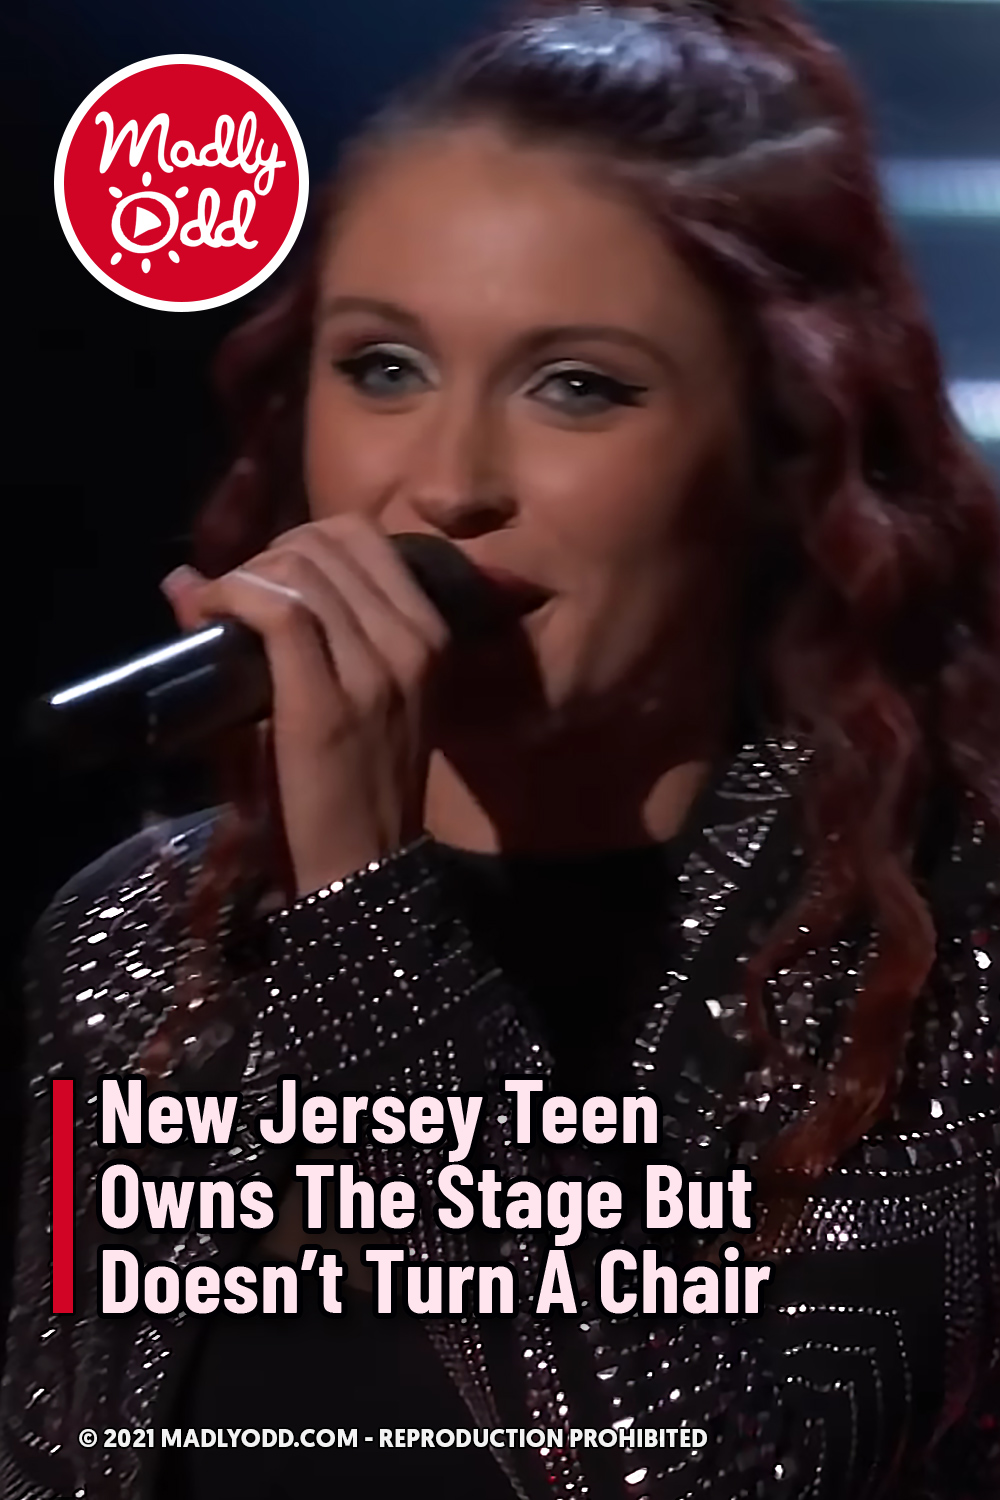 New Jersey Teen Owns The Stage But Doesn’t Turn A Chair